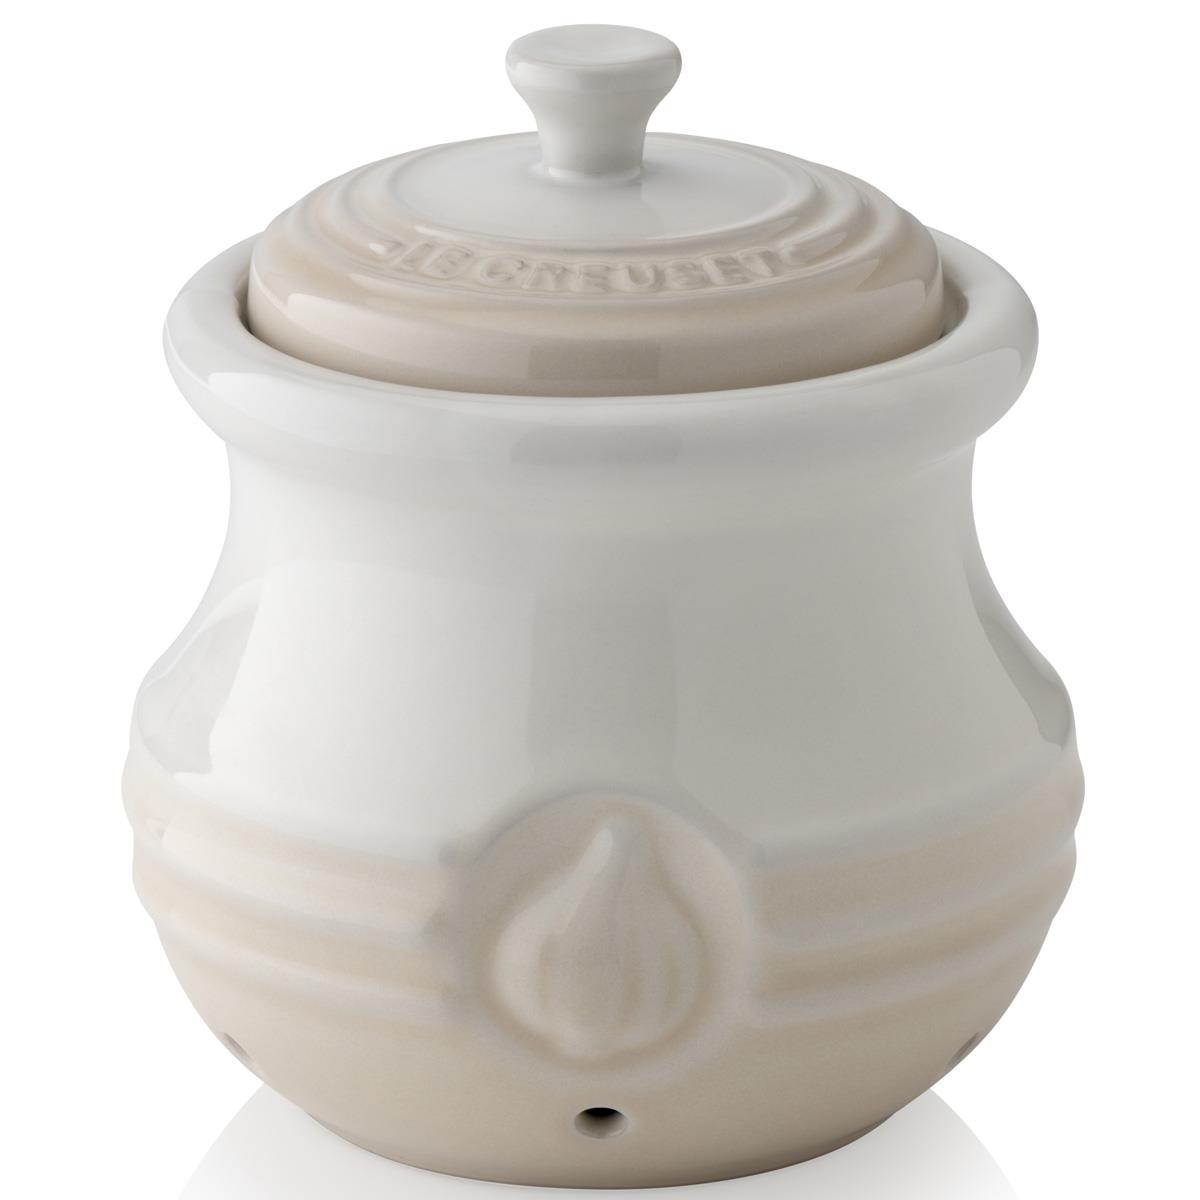 What are the characteristics of the Le Creuset garlic keeper?